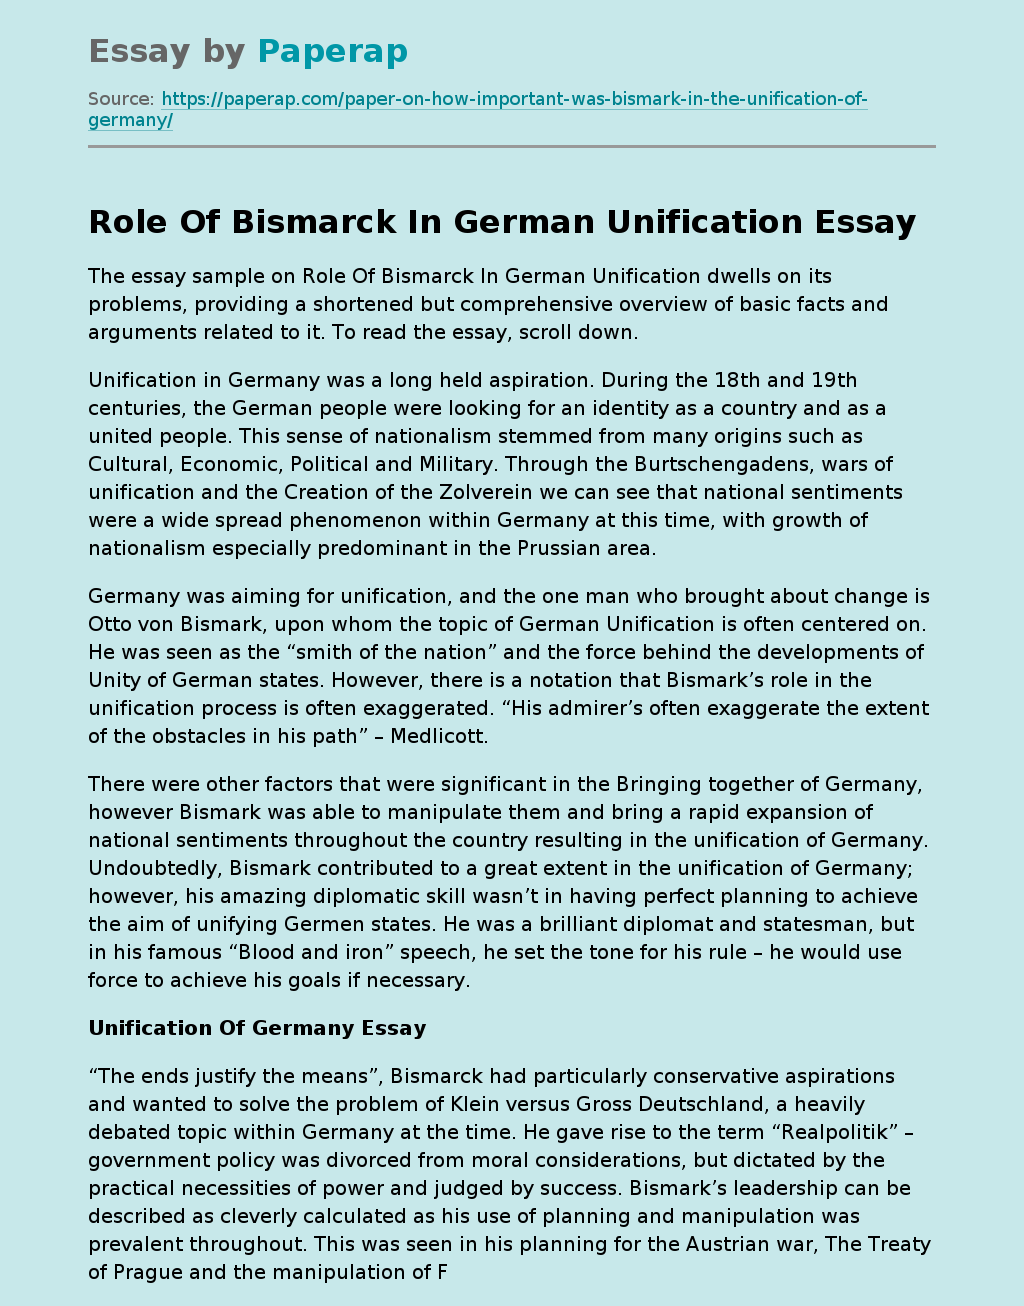 Role Of Bismarck In German Unification